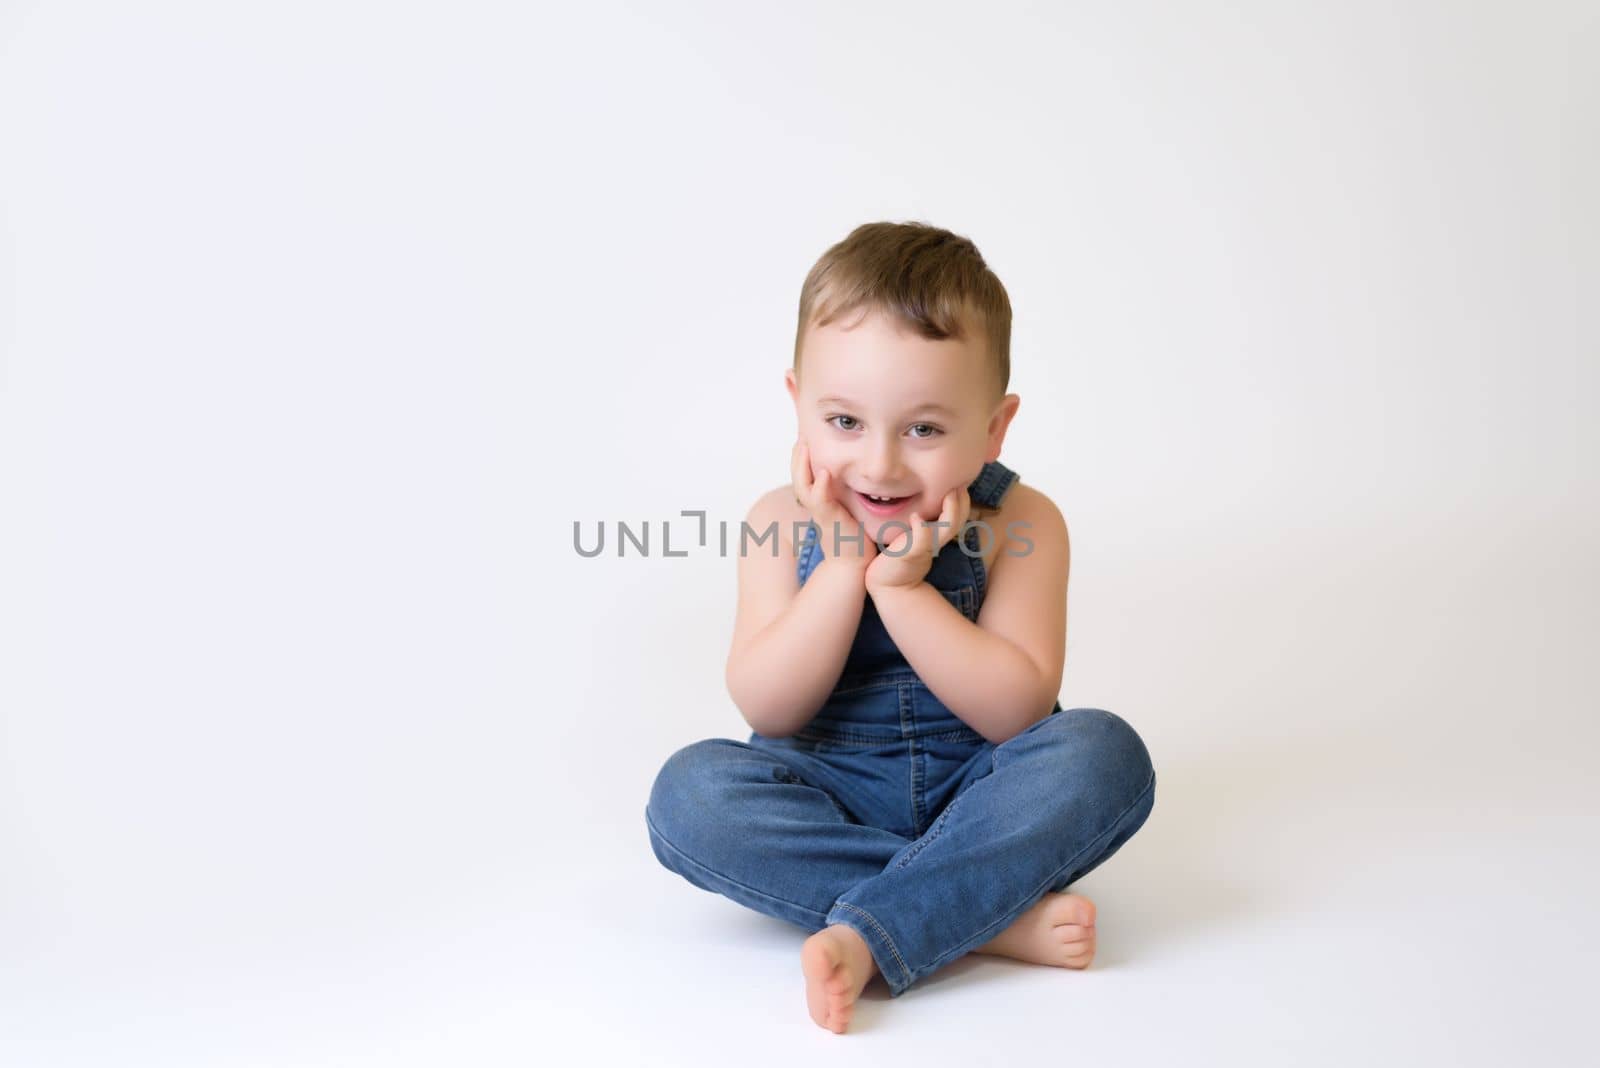 Happy child - isolated over a white background by jcdiazhidalgo